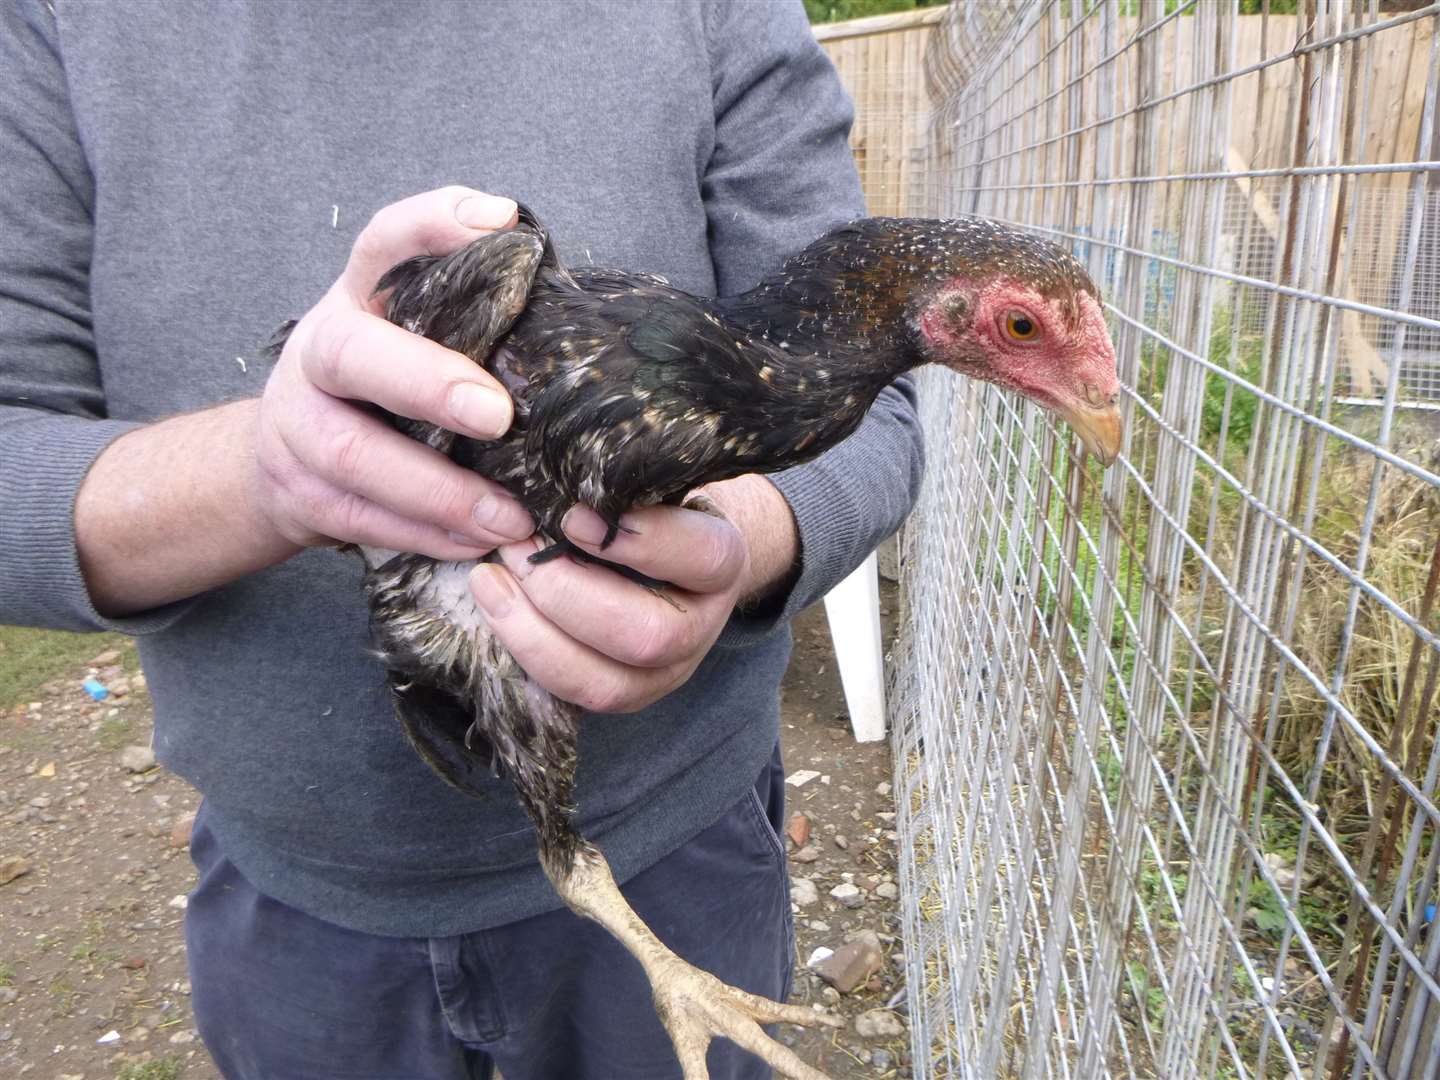 RSPCA investigators seized two cockerels from a site in Longfield in 2018. Picture: RSPCA